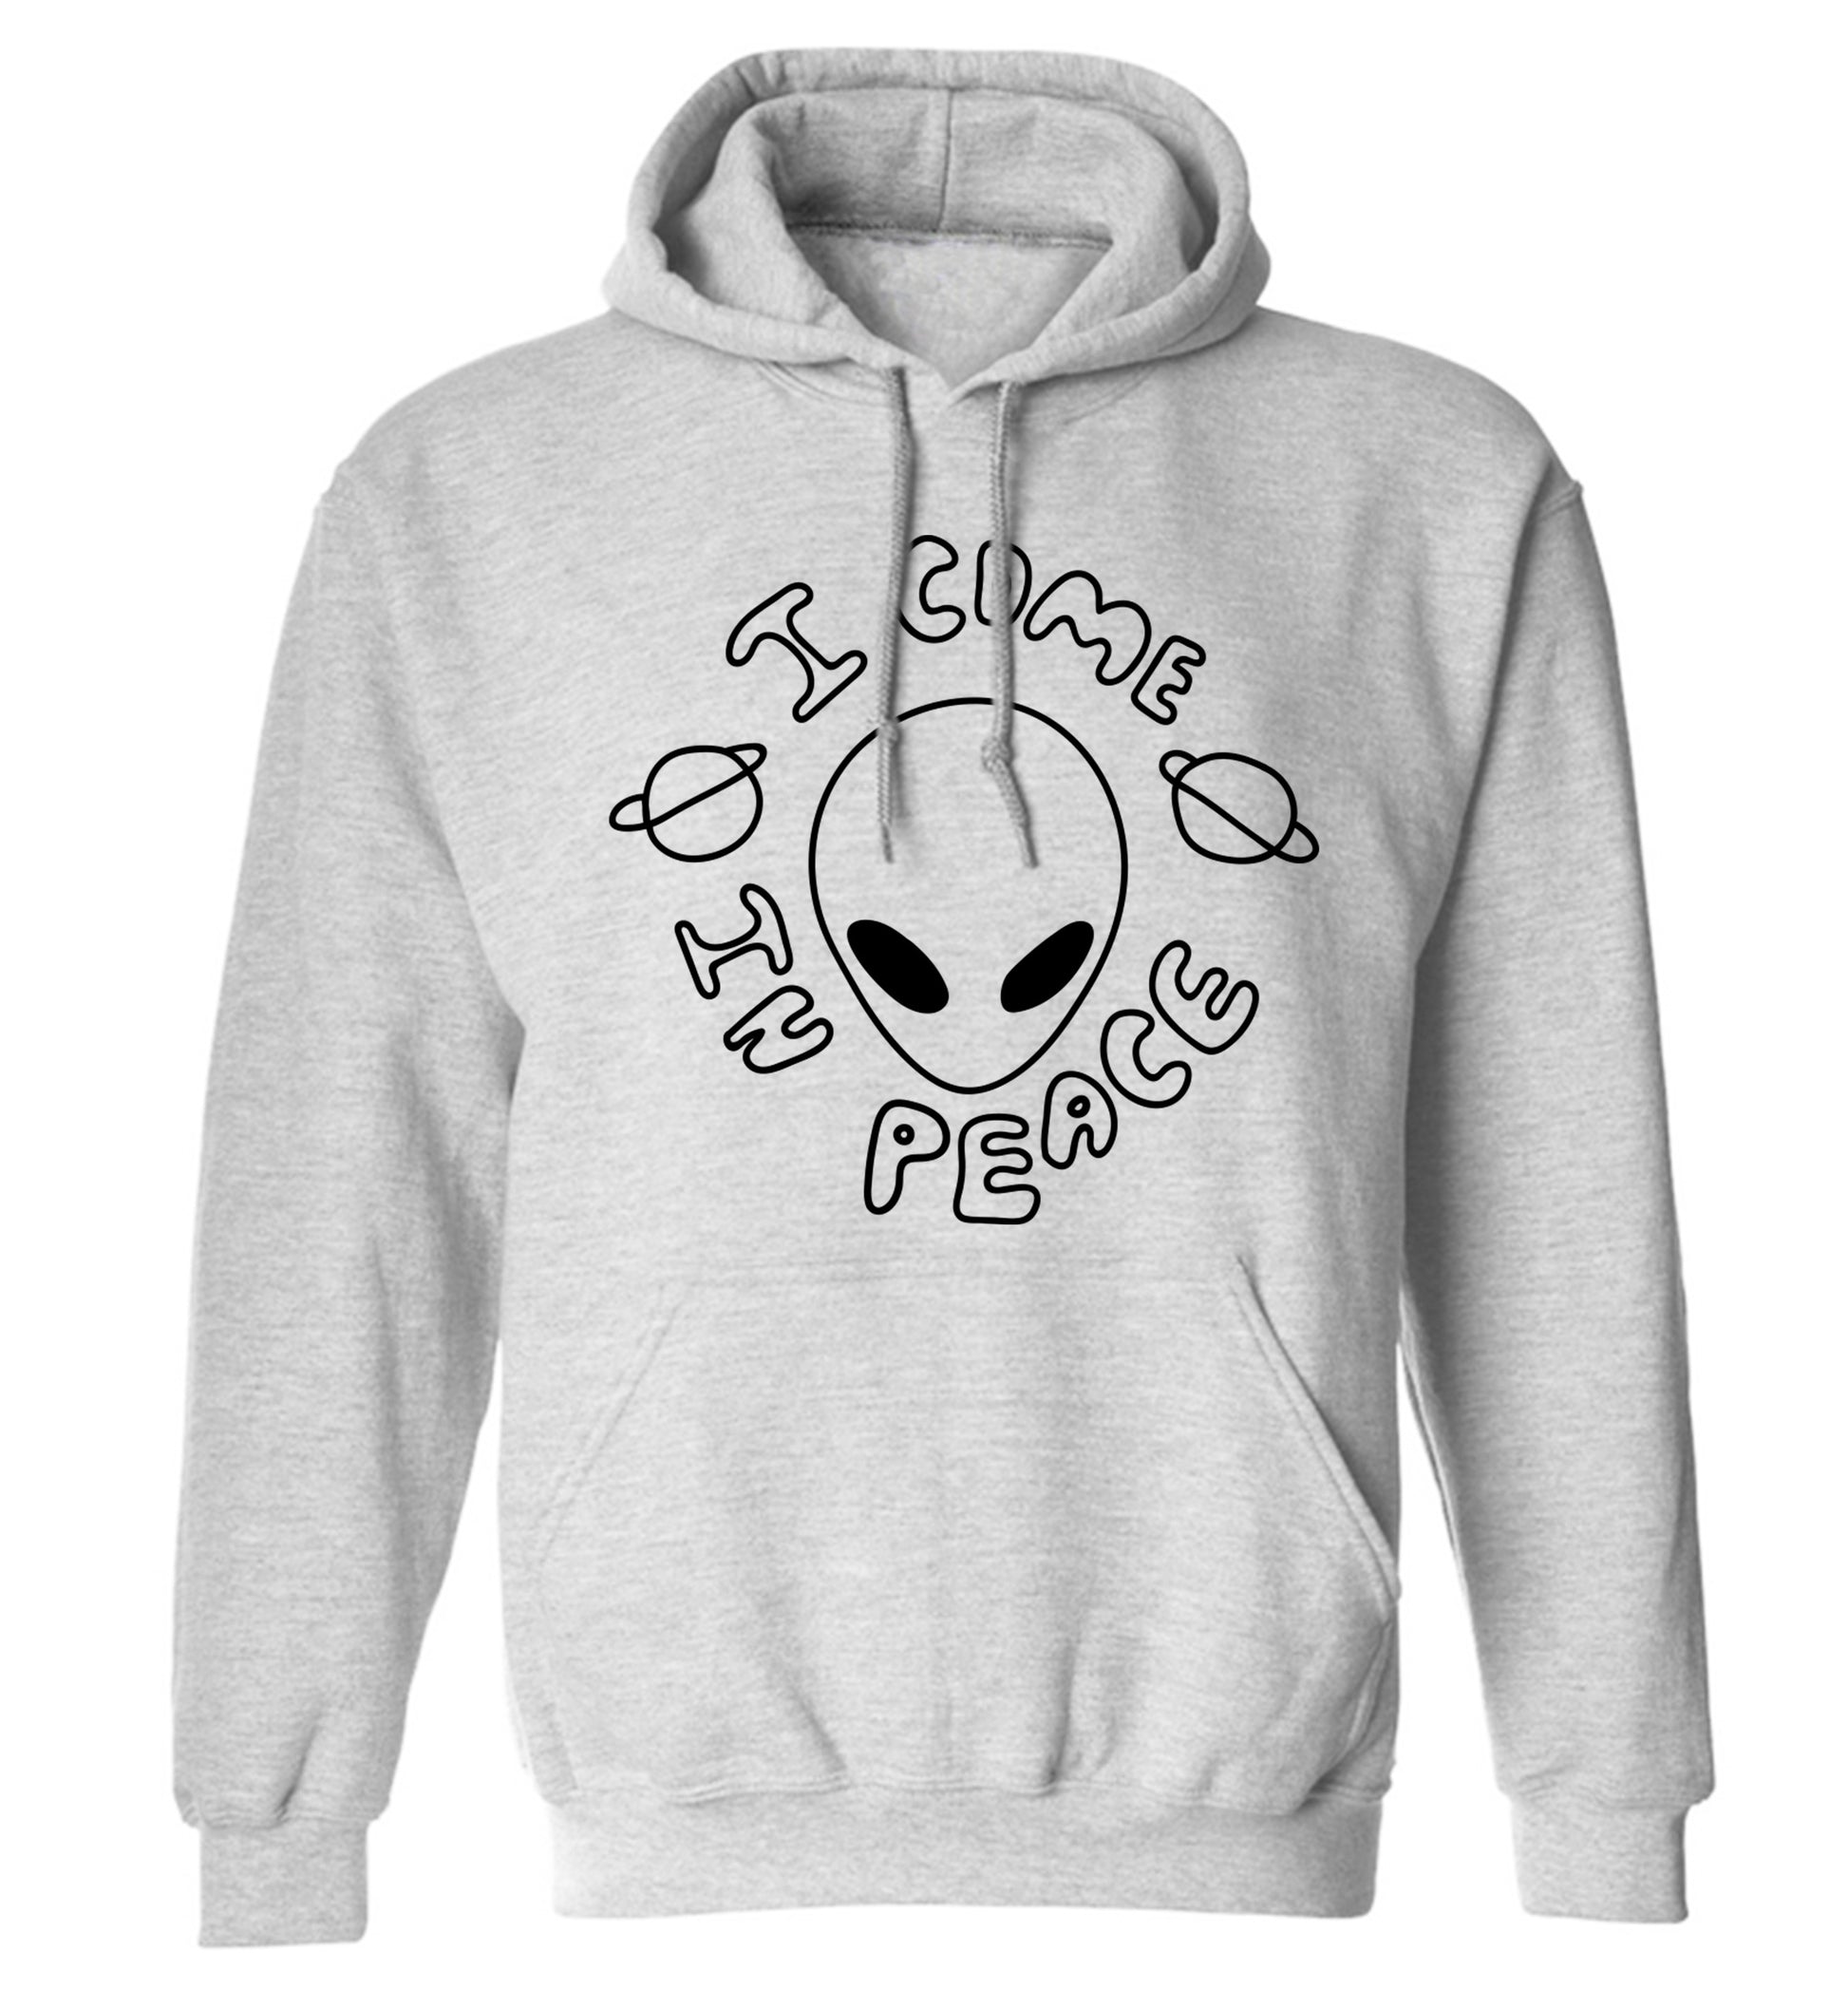 I come in peace adults unisex grey hoodie 2XL